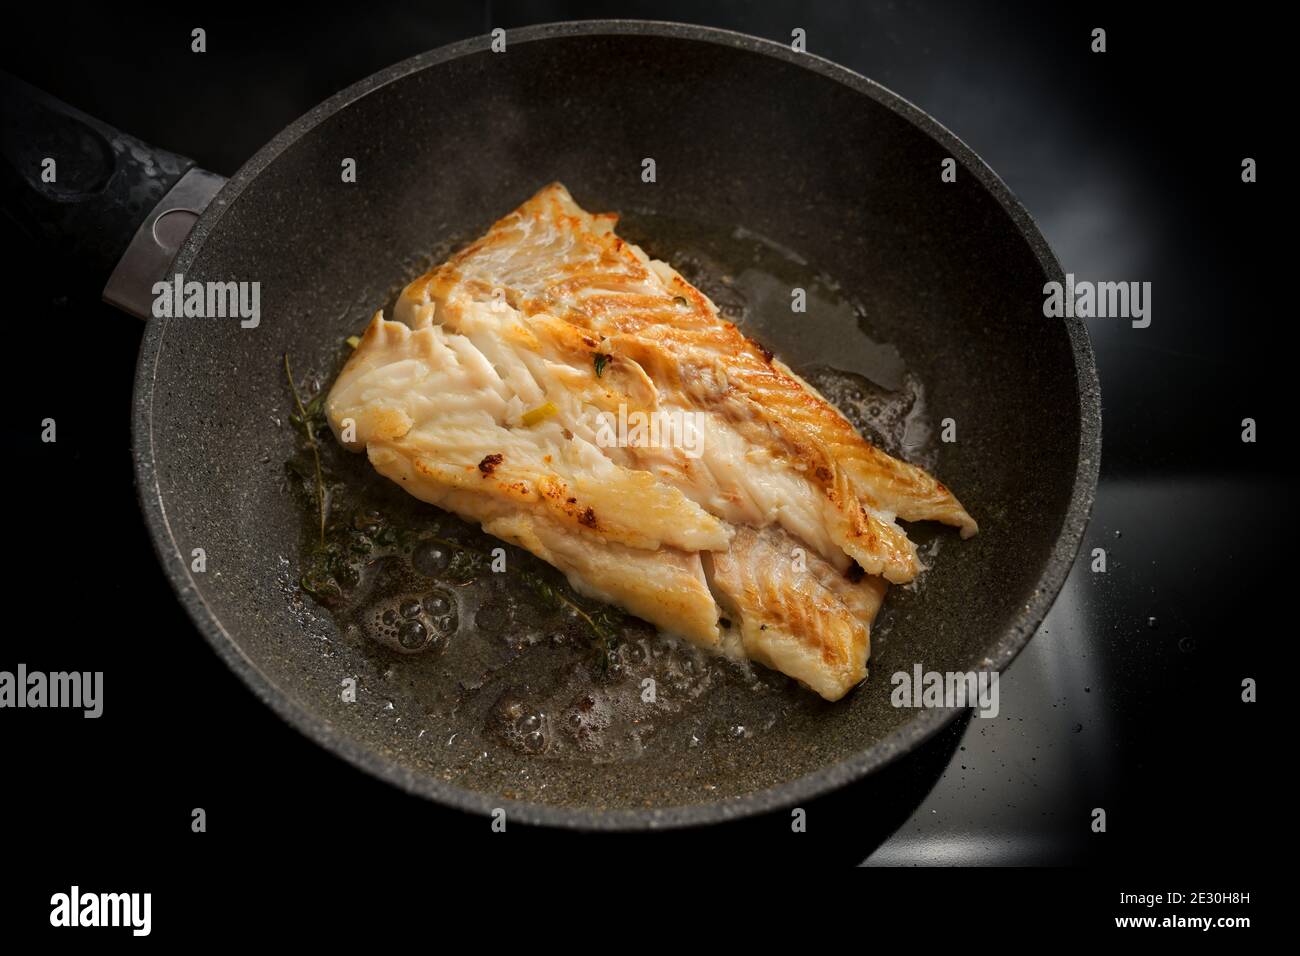 Cod fish fillet sautéed in butter in a frying pan on the stove, selected focus, narrow depth of field Stock Photo